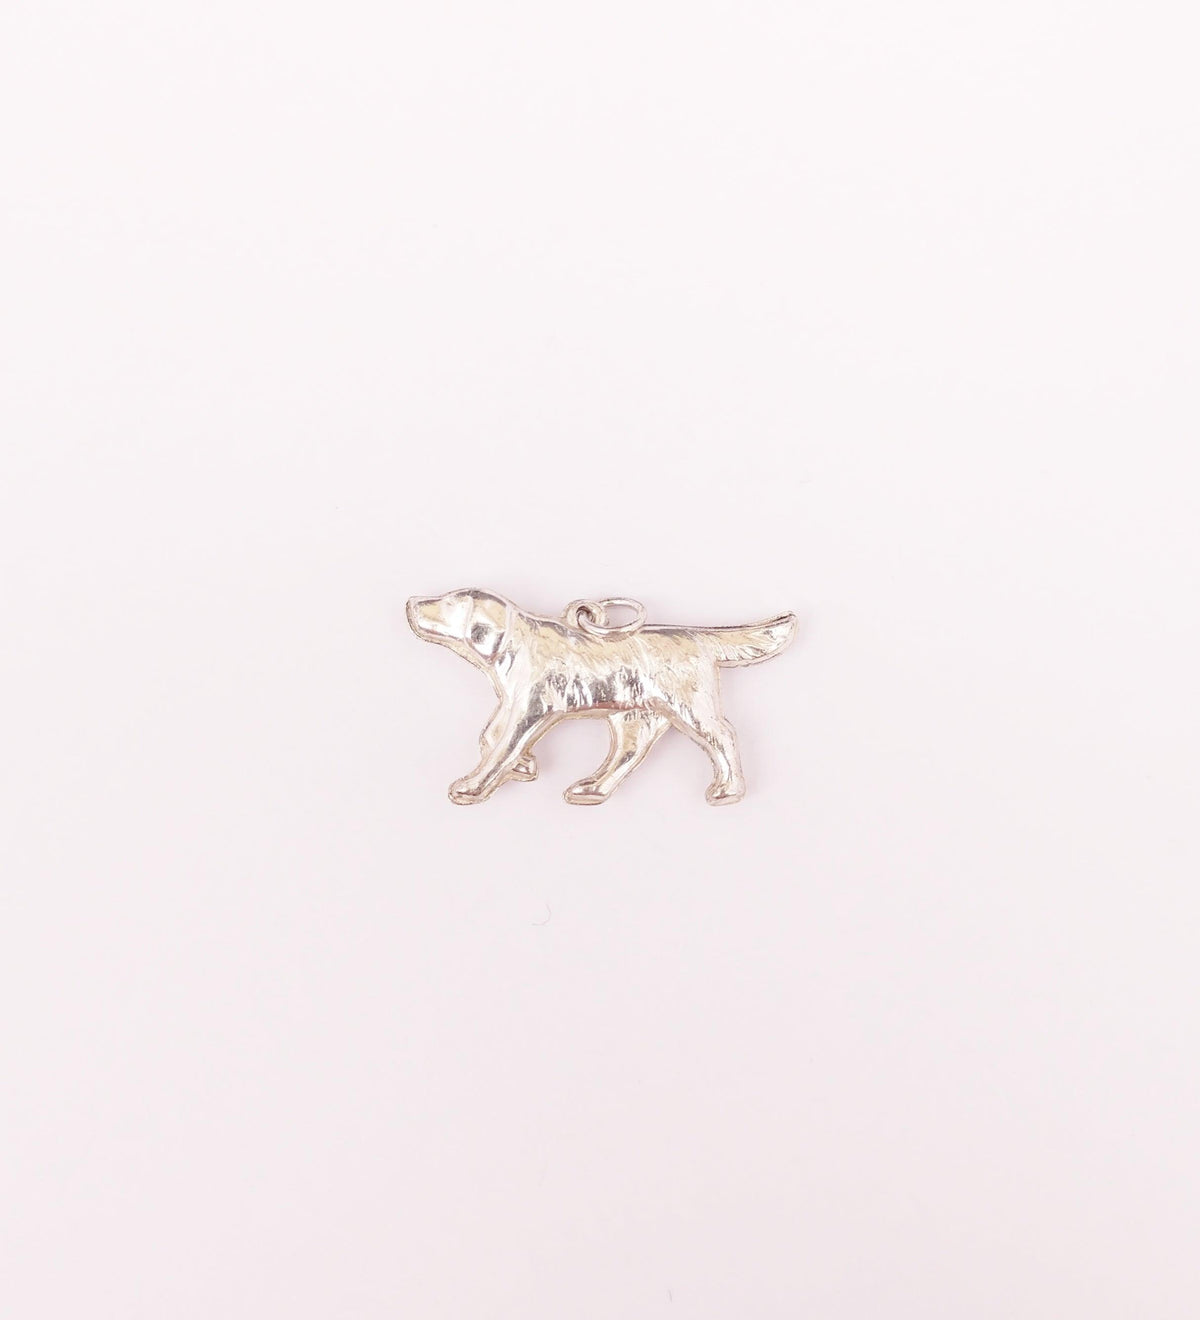 Vintage Hunter Pointing Bird Dog Sterling Silver Charm - Hers and His Treasures